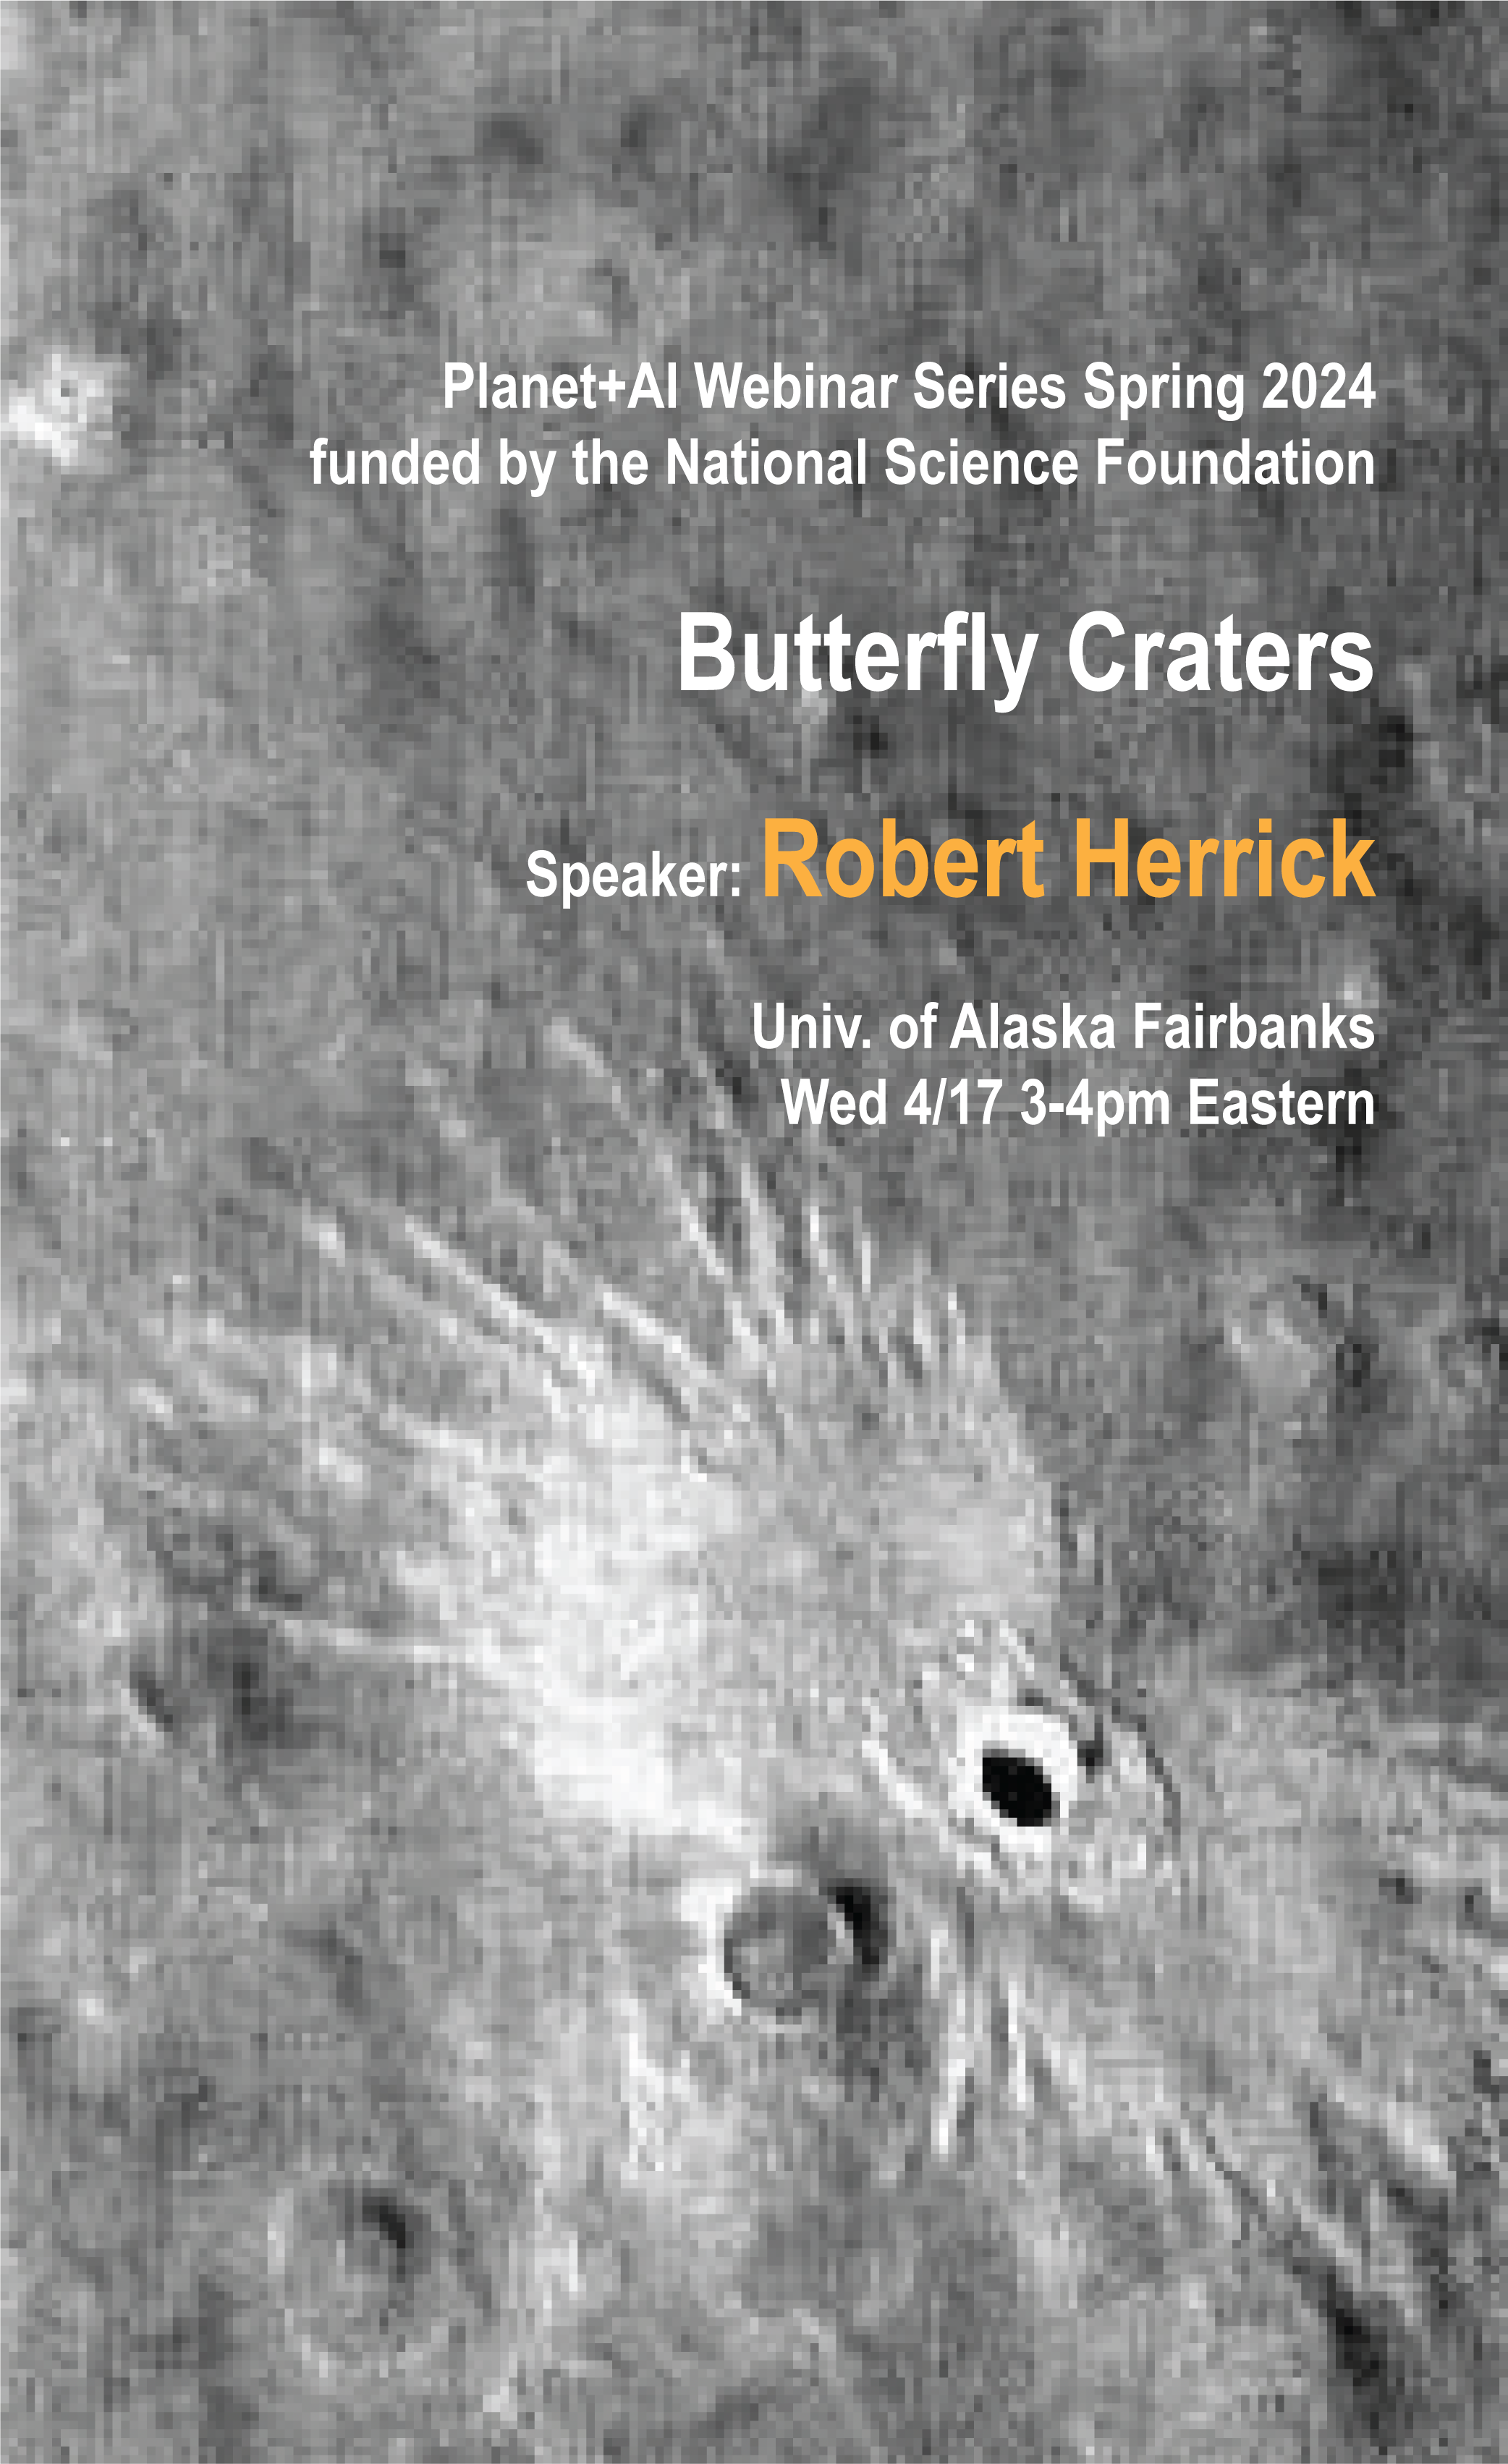 Webinar on April 17: Butterfly Craters